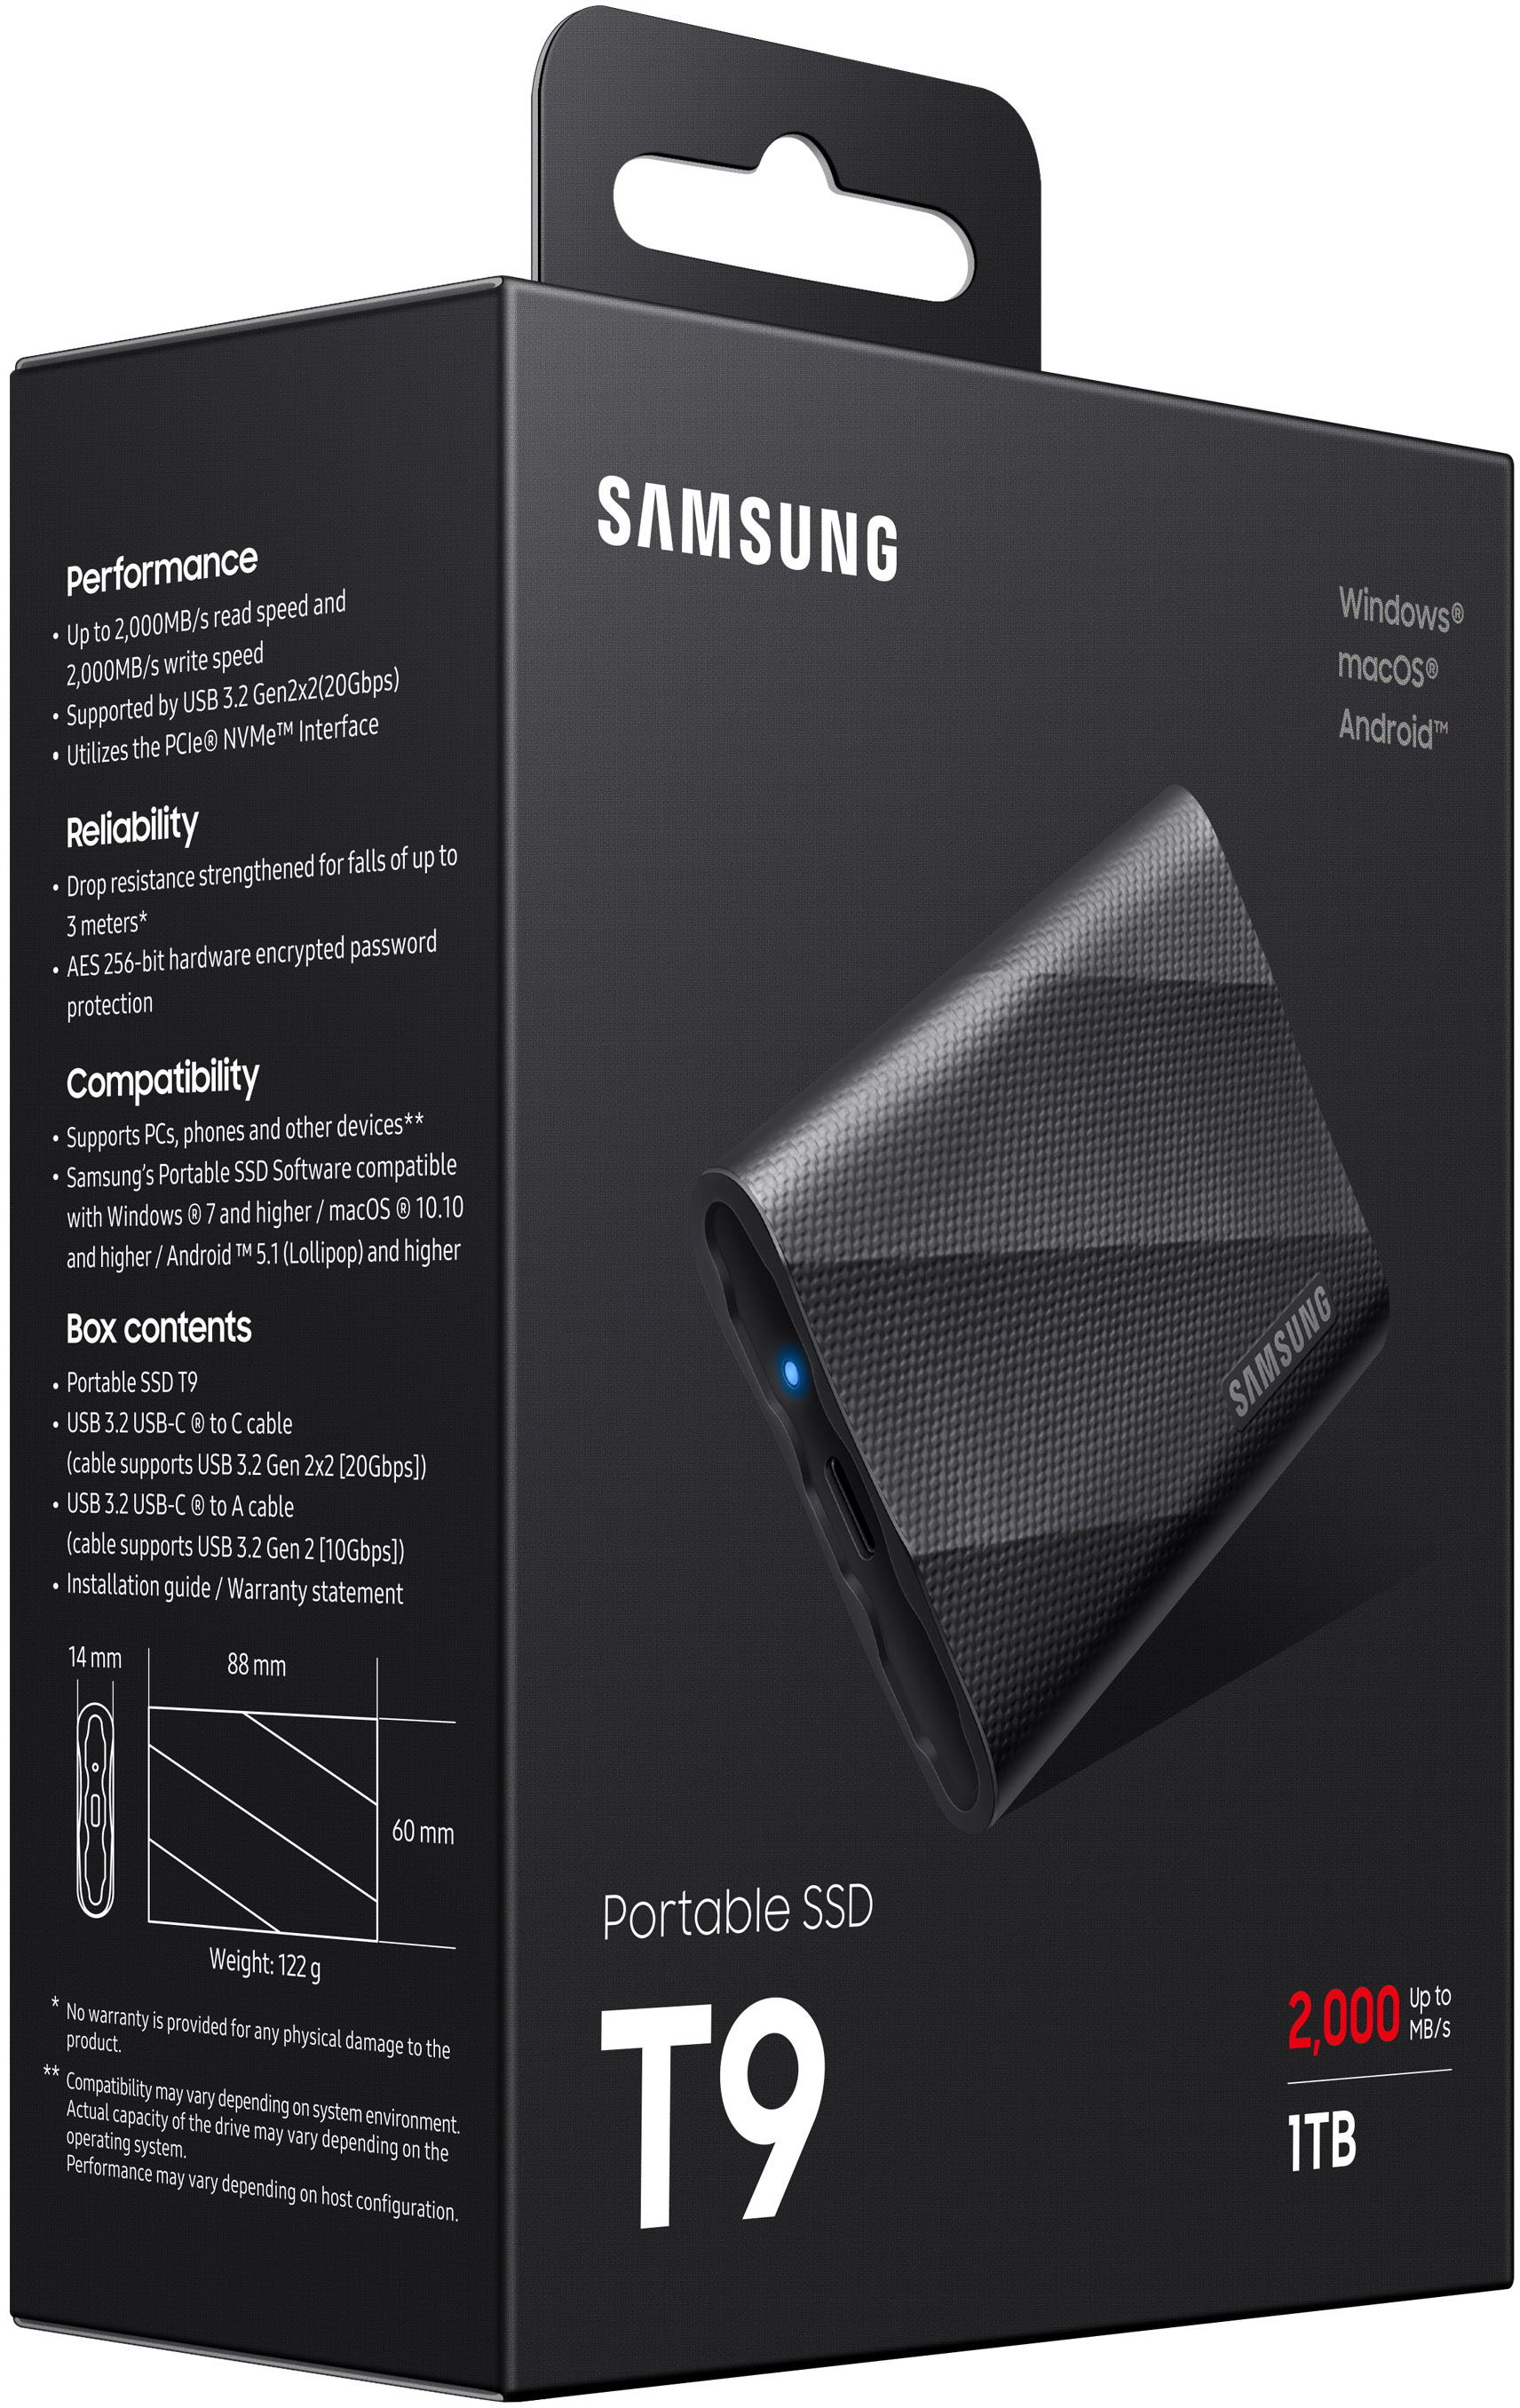 Samsung Portable SSD T9 - Review 2023 - PCMag UK